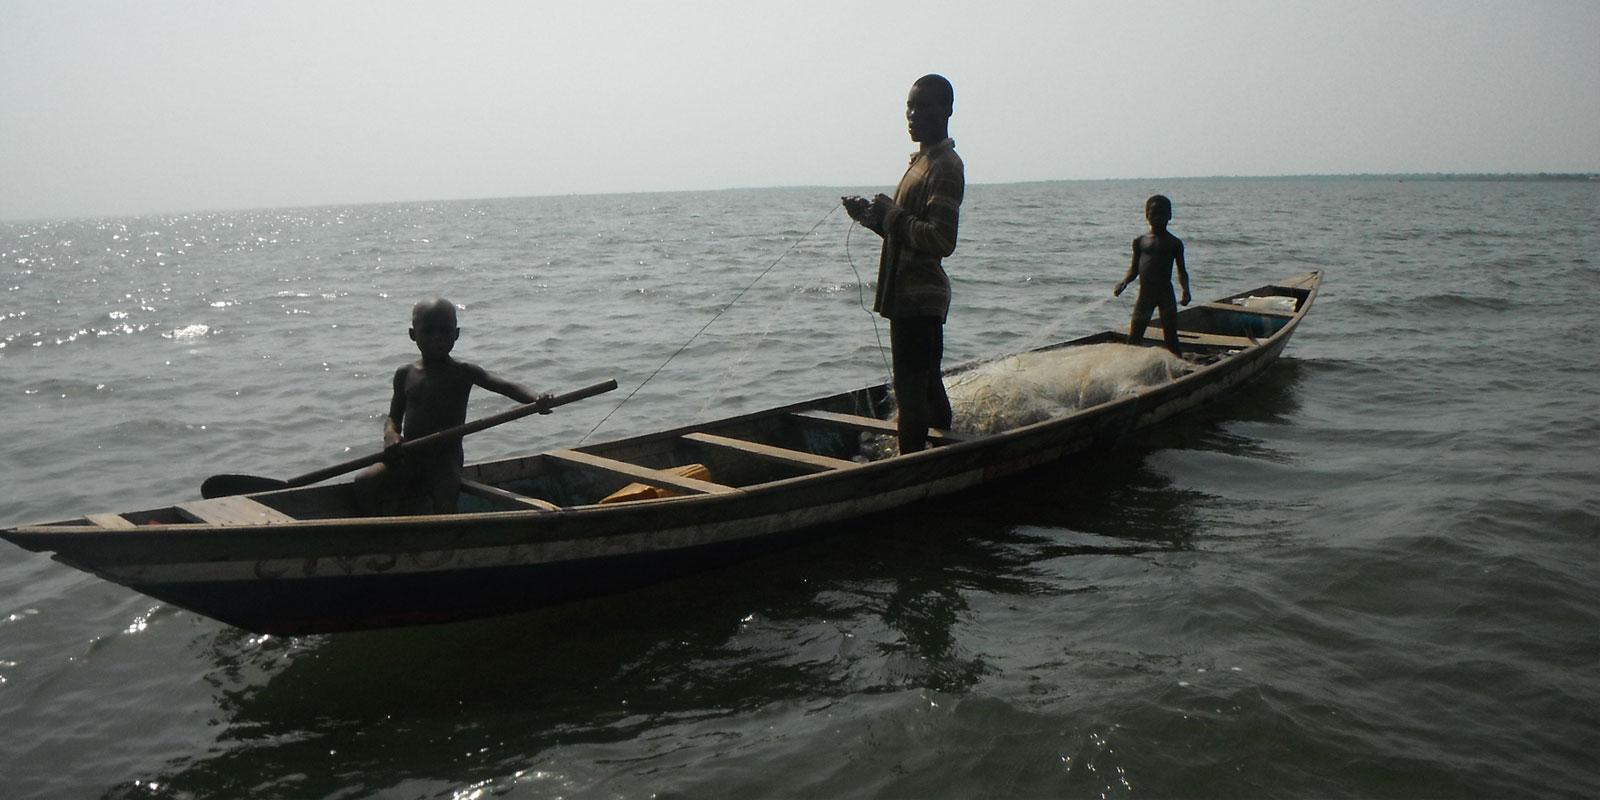 Two small boys and a man in a fishing boat